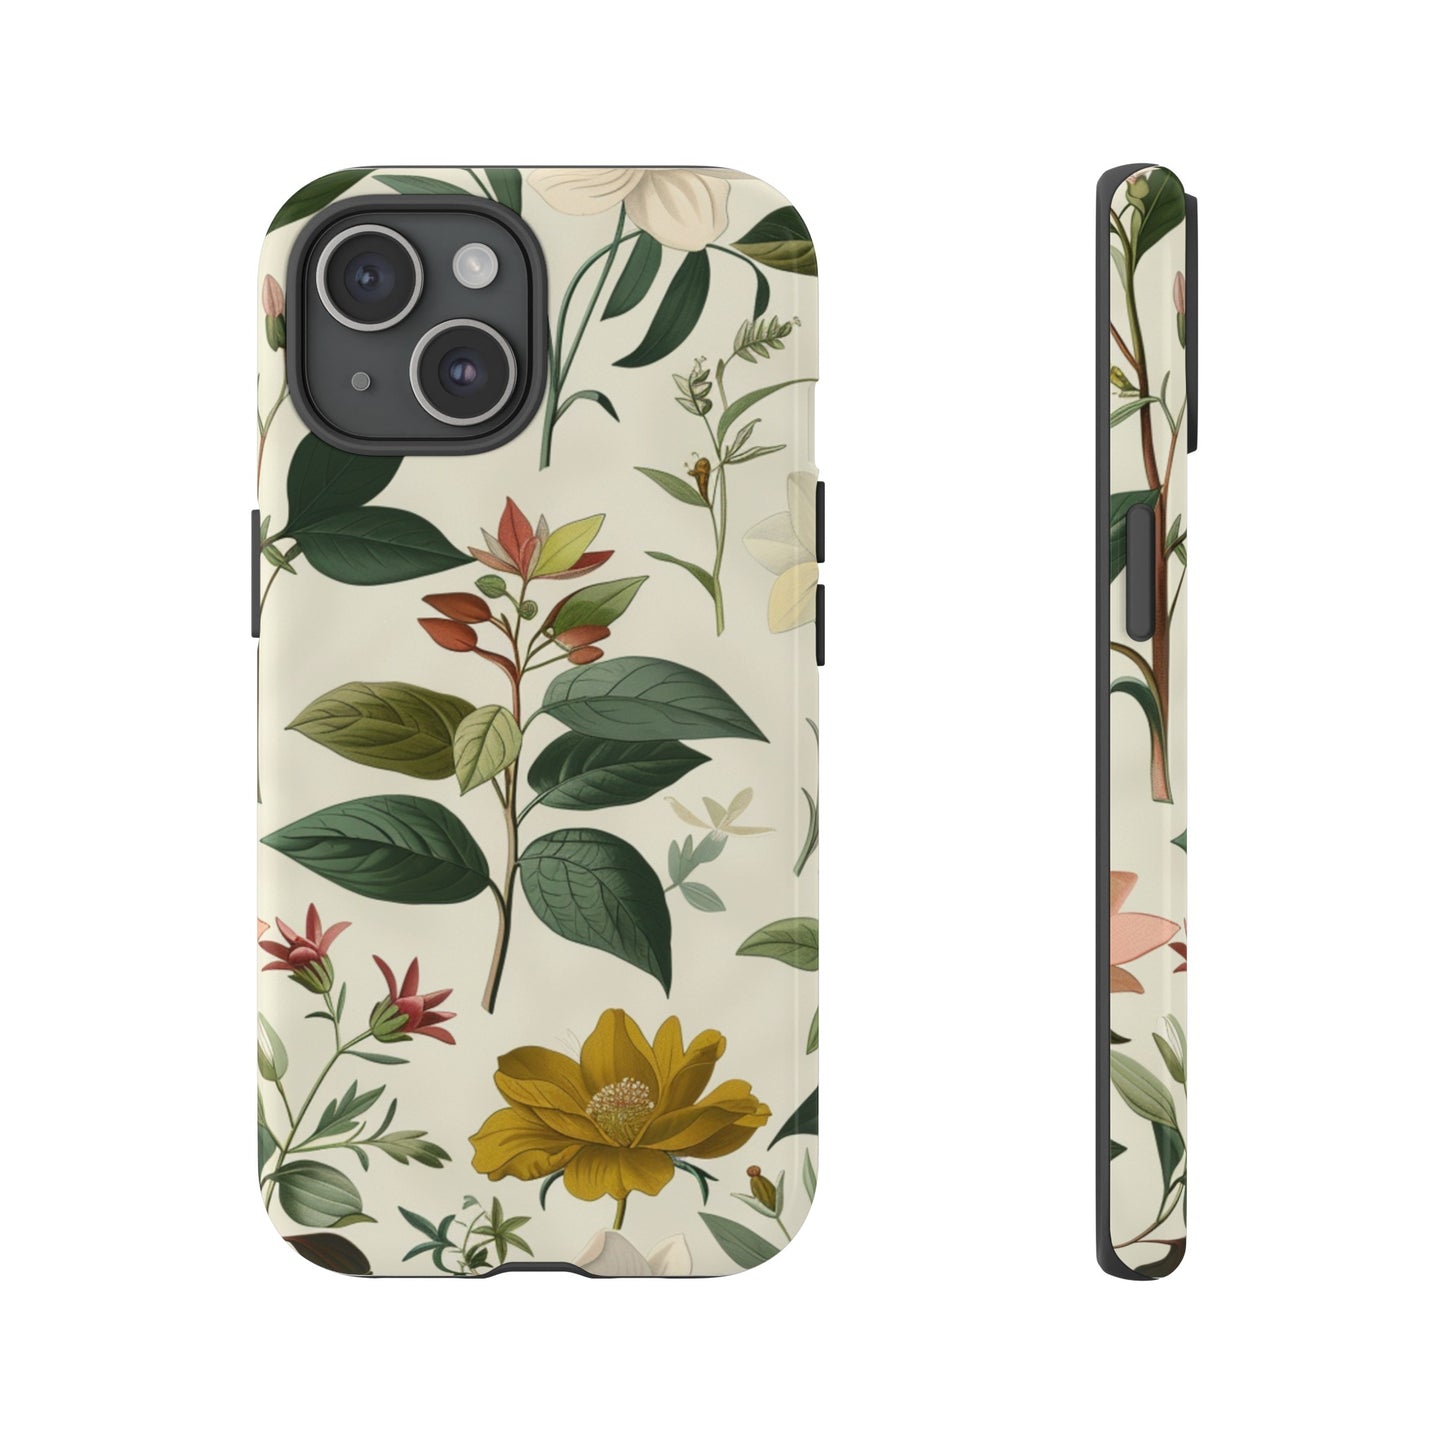 An elegant featuring a vintage botanical illustration in muted tones-